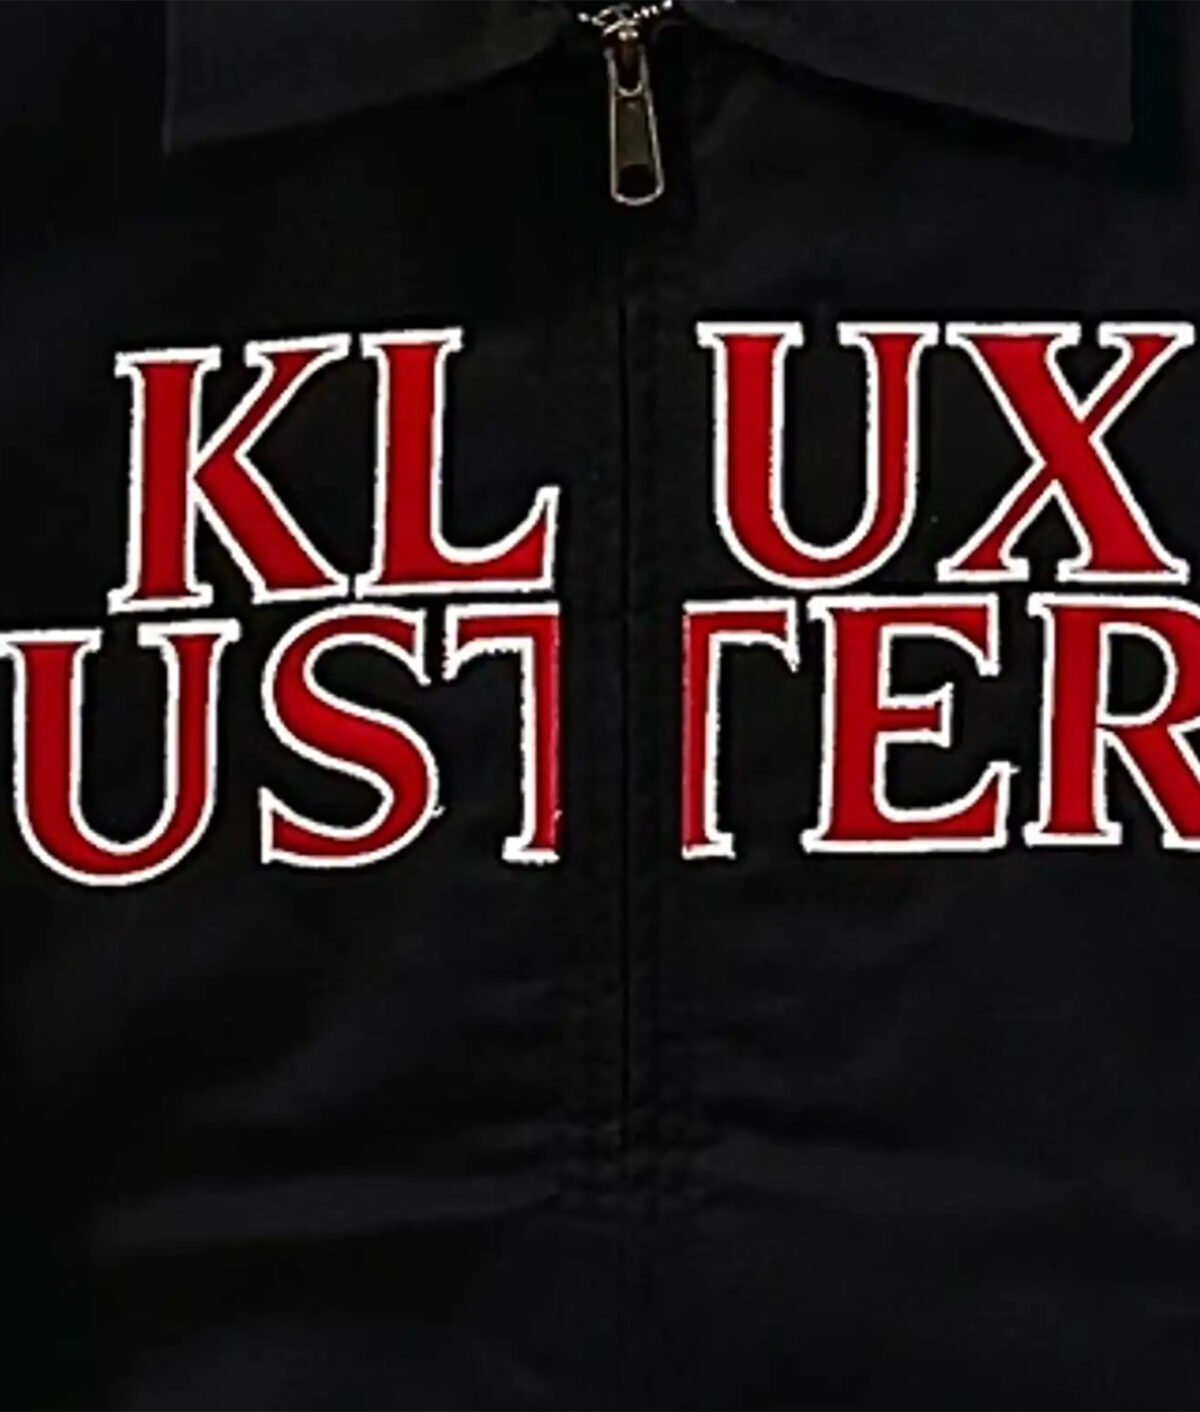 Klux Busters Jacket